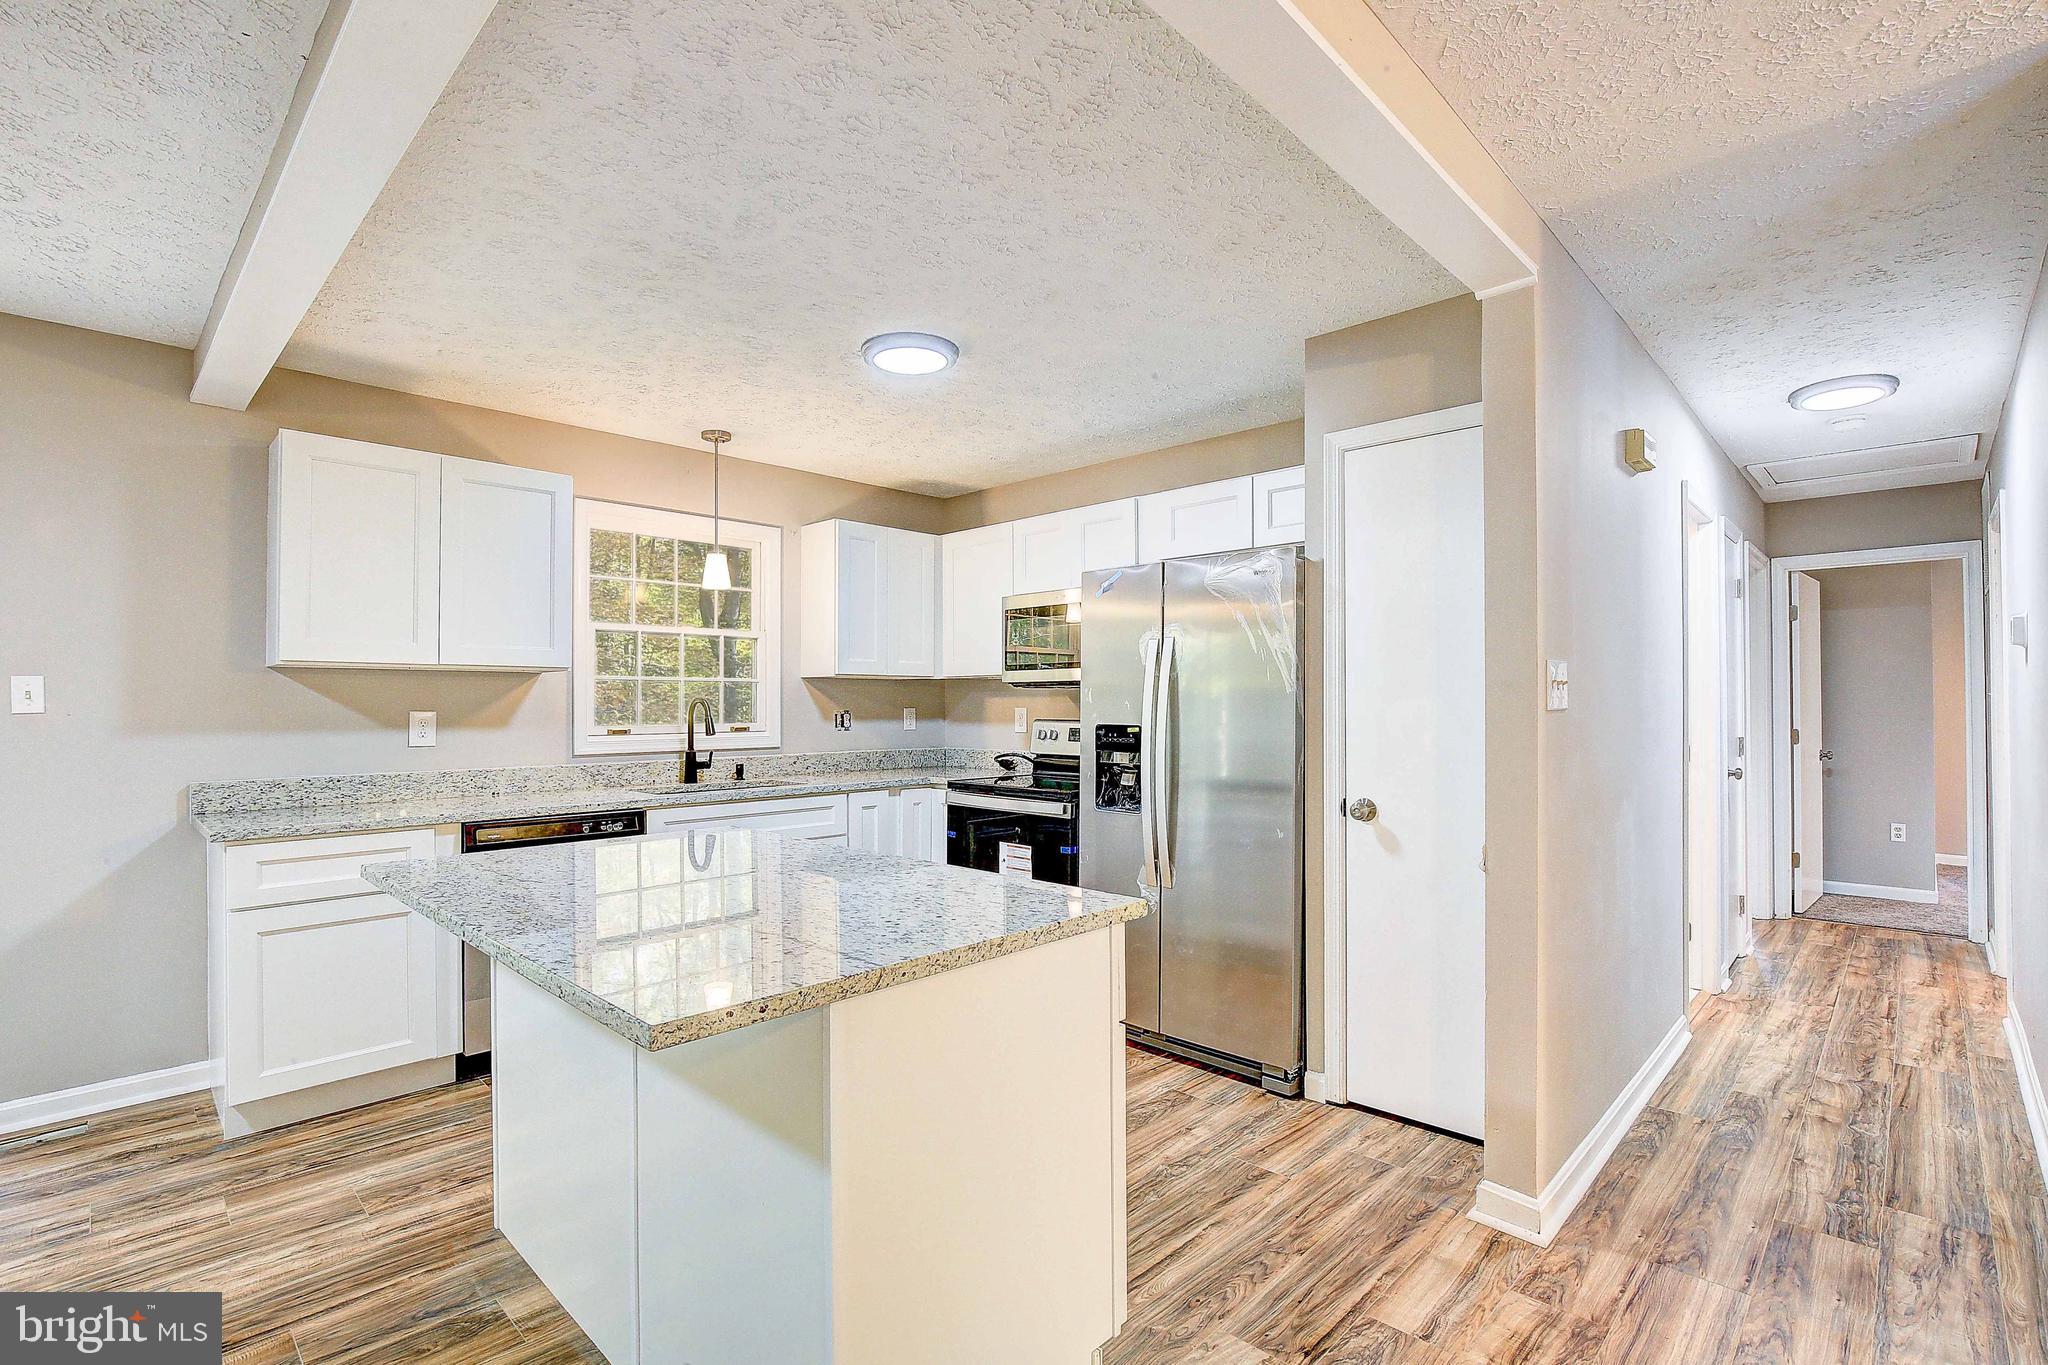 a kitchen with stainless steel appliances kitchen island granite countertop a refrigerator a sink dishwasher a stove with wooden cabinets and floor